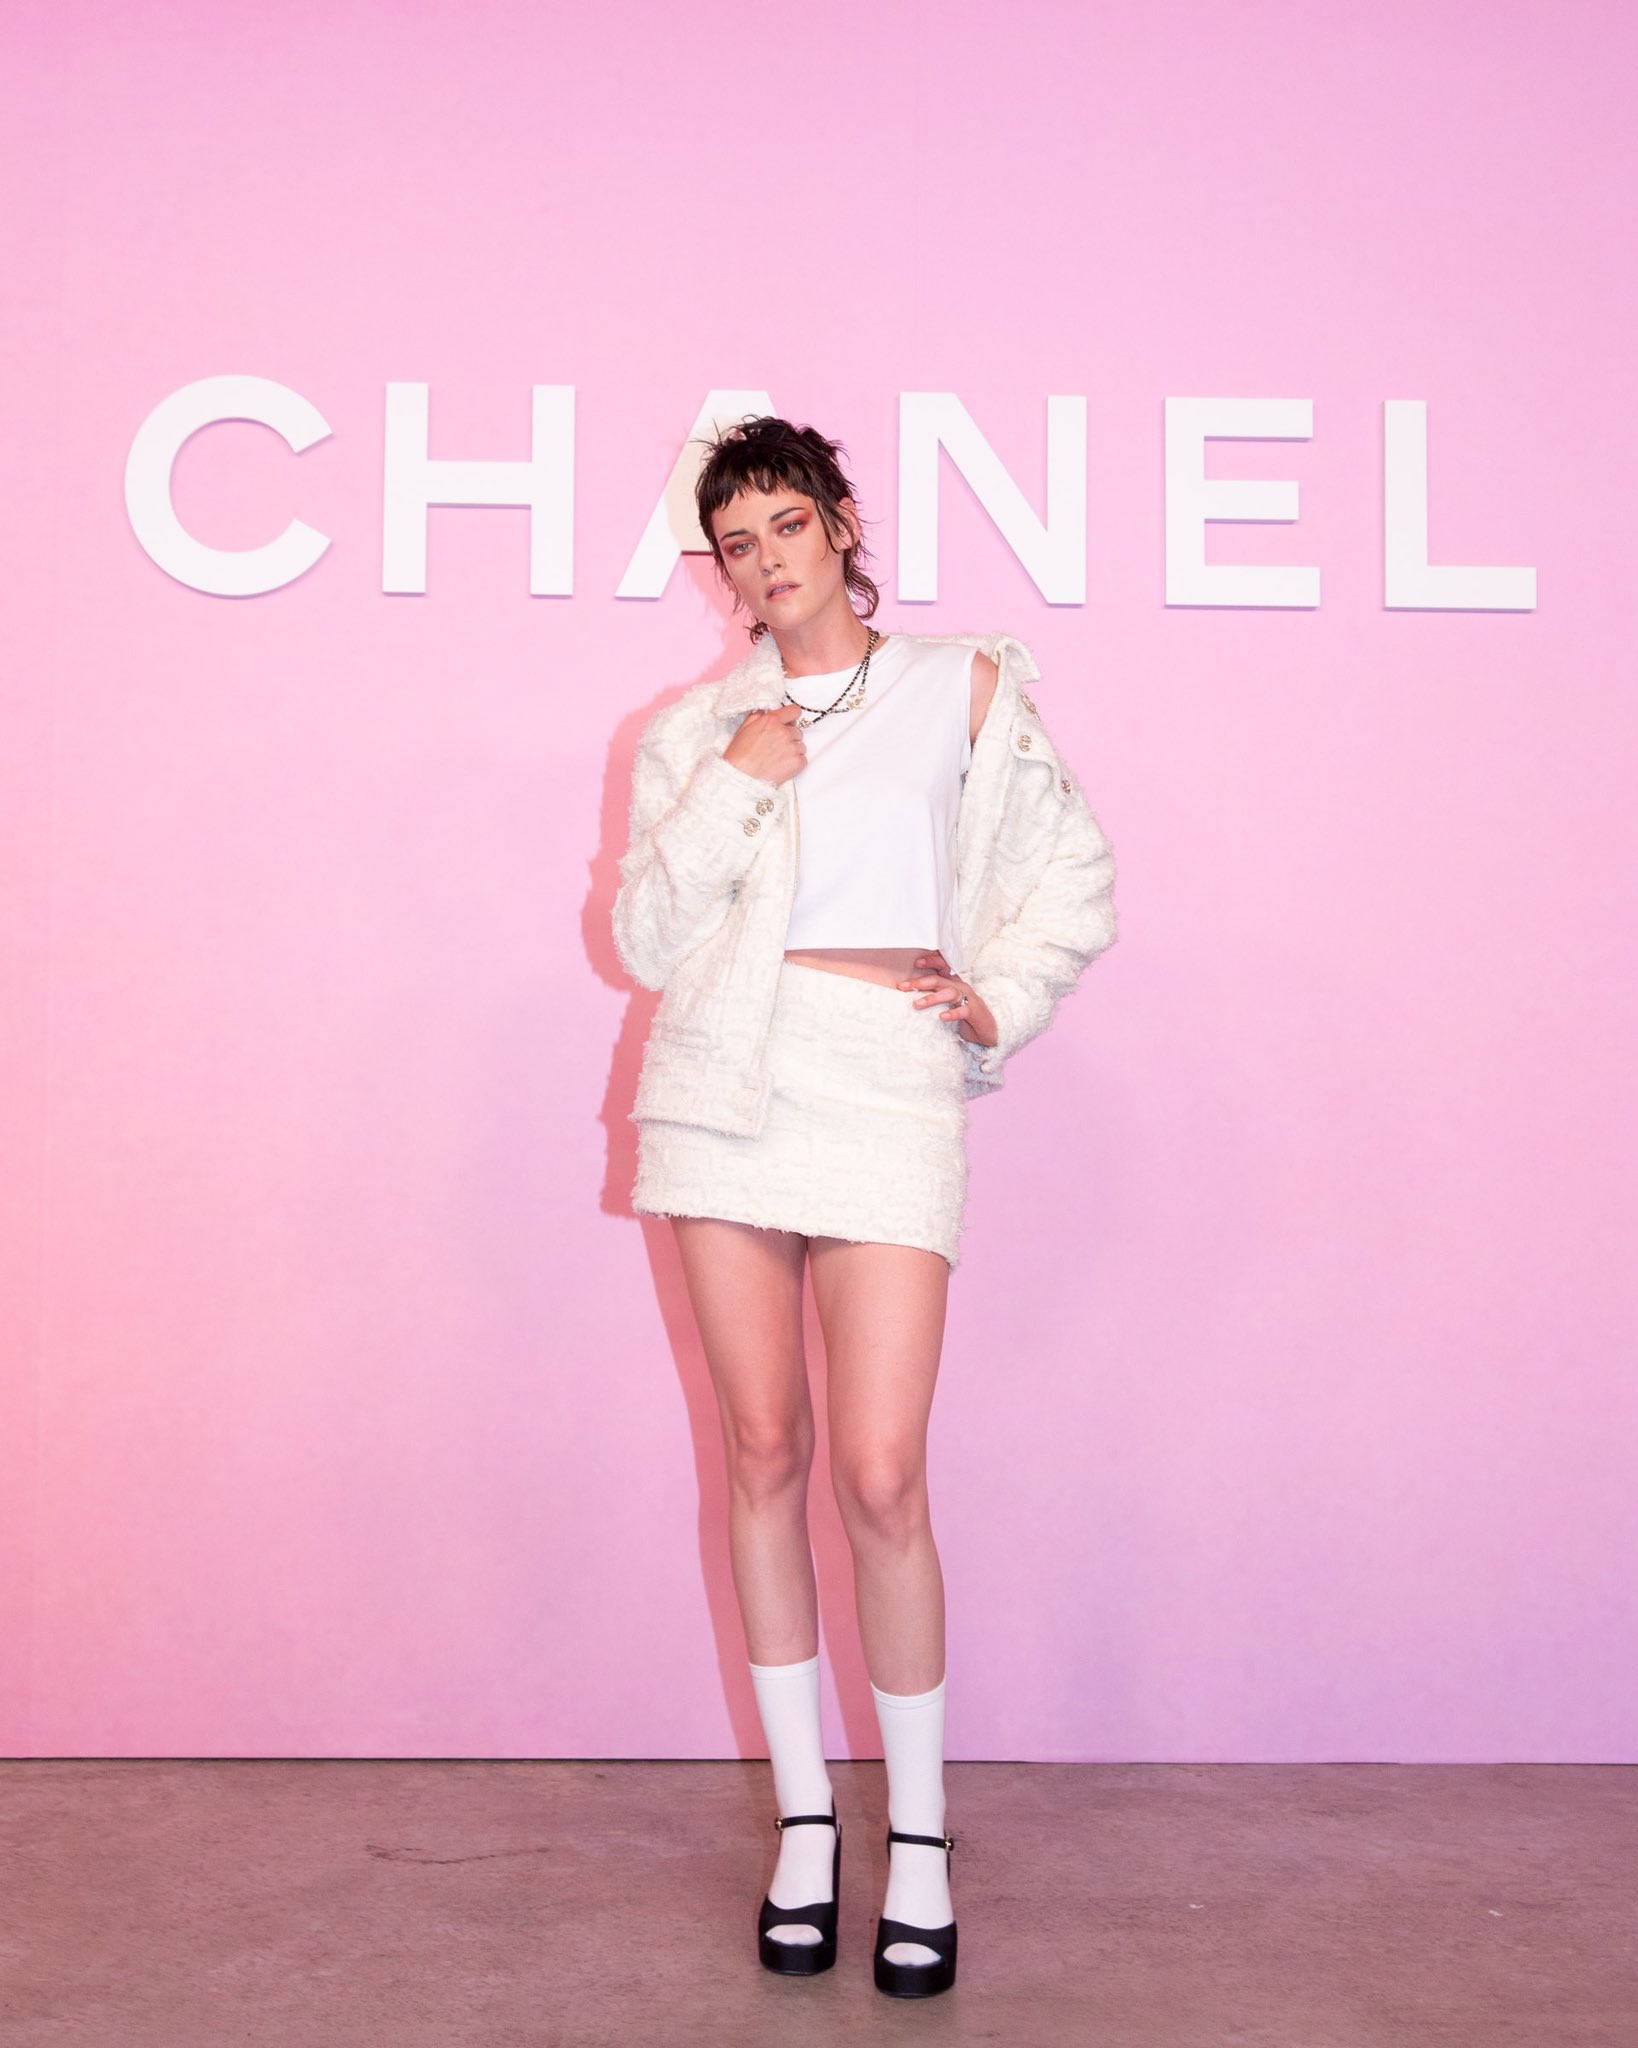 chanel aesthetic clothes